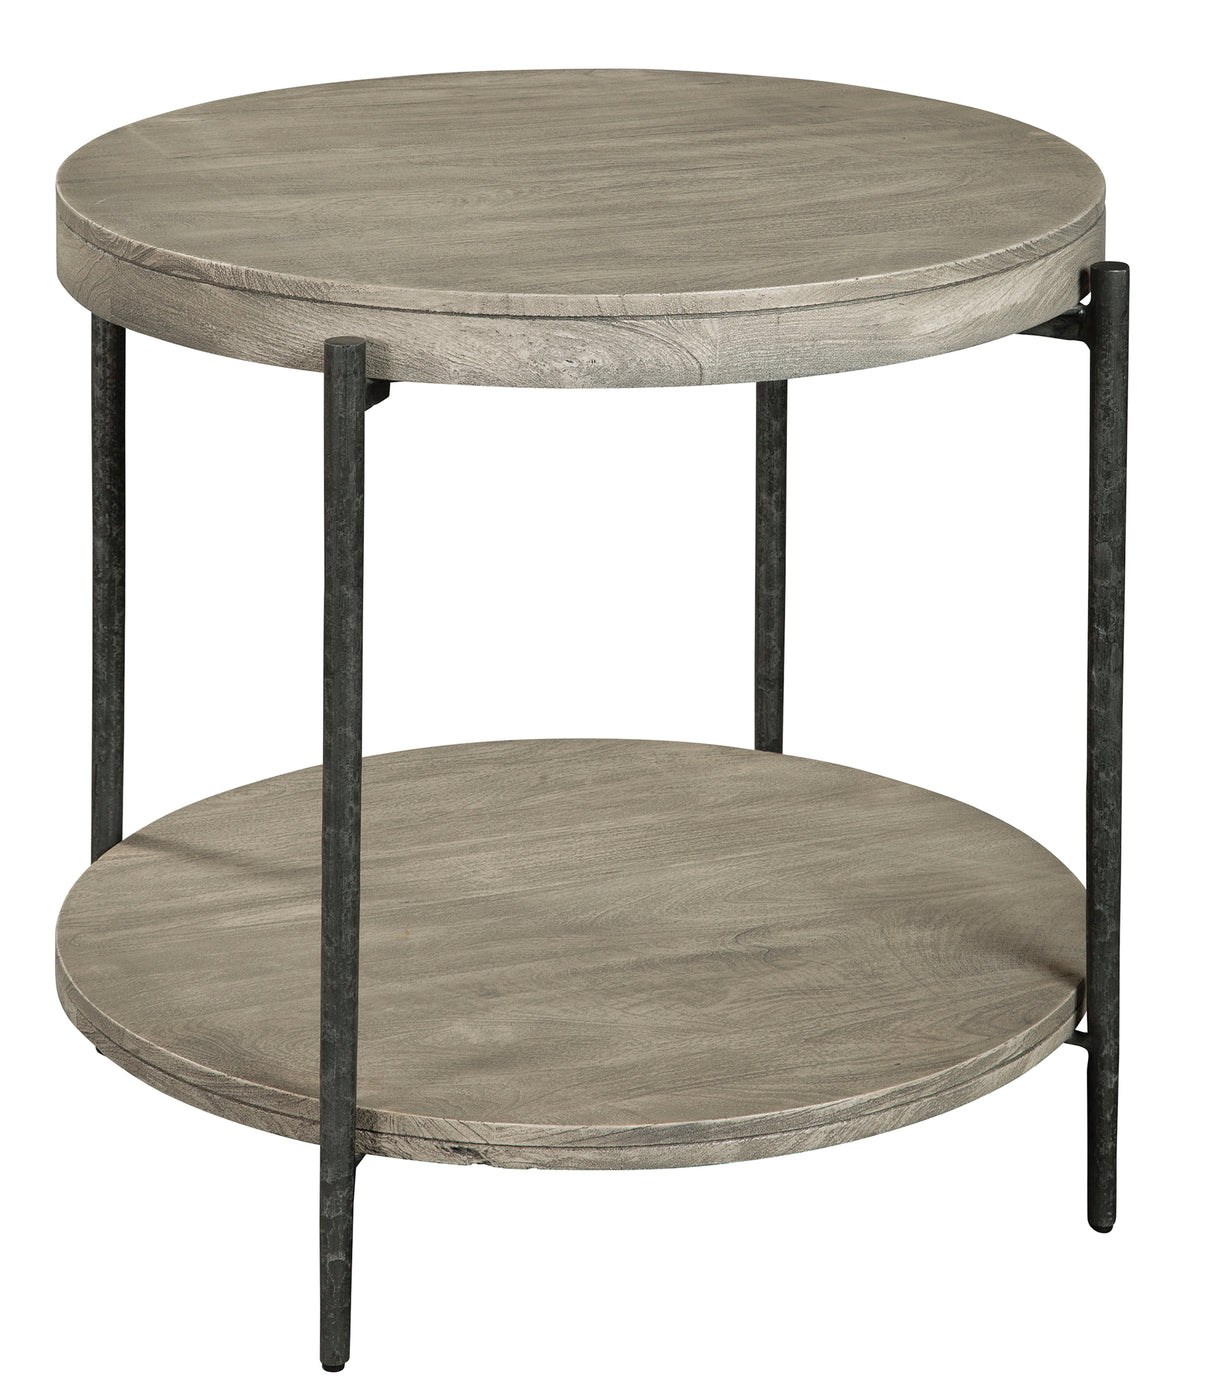 Hekman 24904 Bedford Park 30.25in. x 30.25in. x 28.25in. End Table